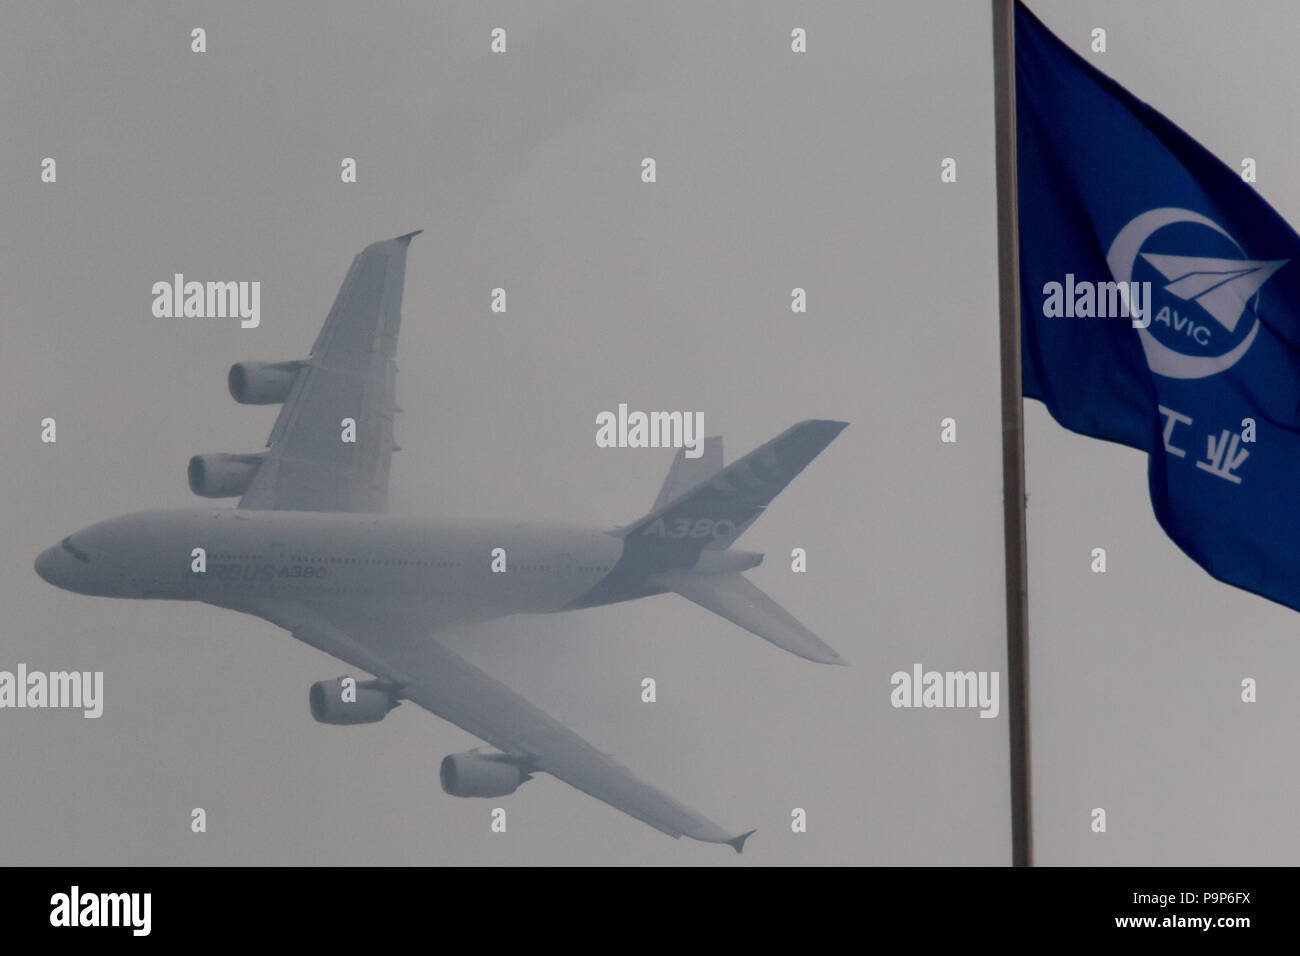 The Airbus A380 widebody jet airplane performs its demonstration flight behind the flag of AVIC (Aviation Industry Corporation of China) at the Airsho Stock Photo